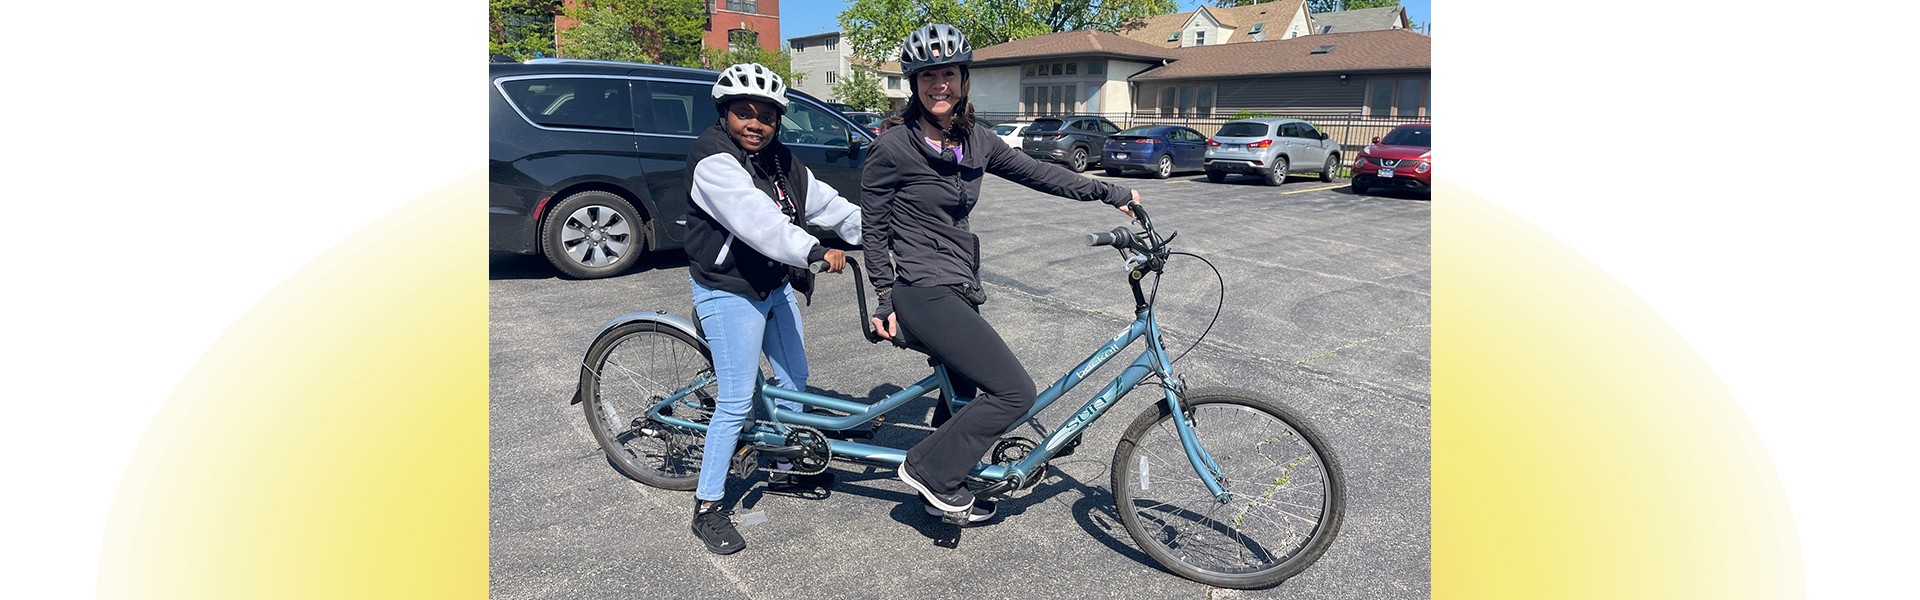 Jenny Achuthan and member on a tandem bike